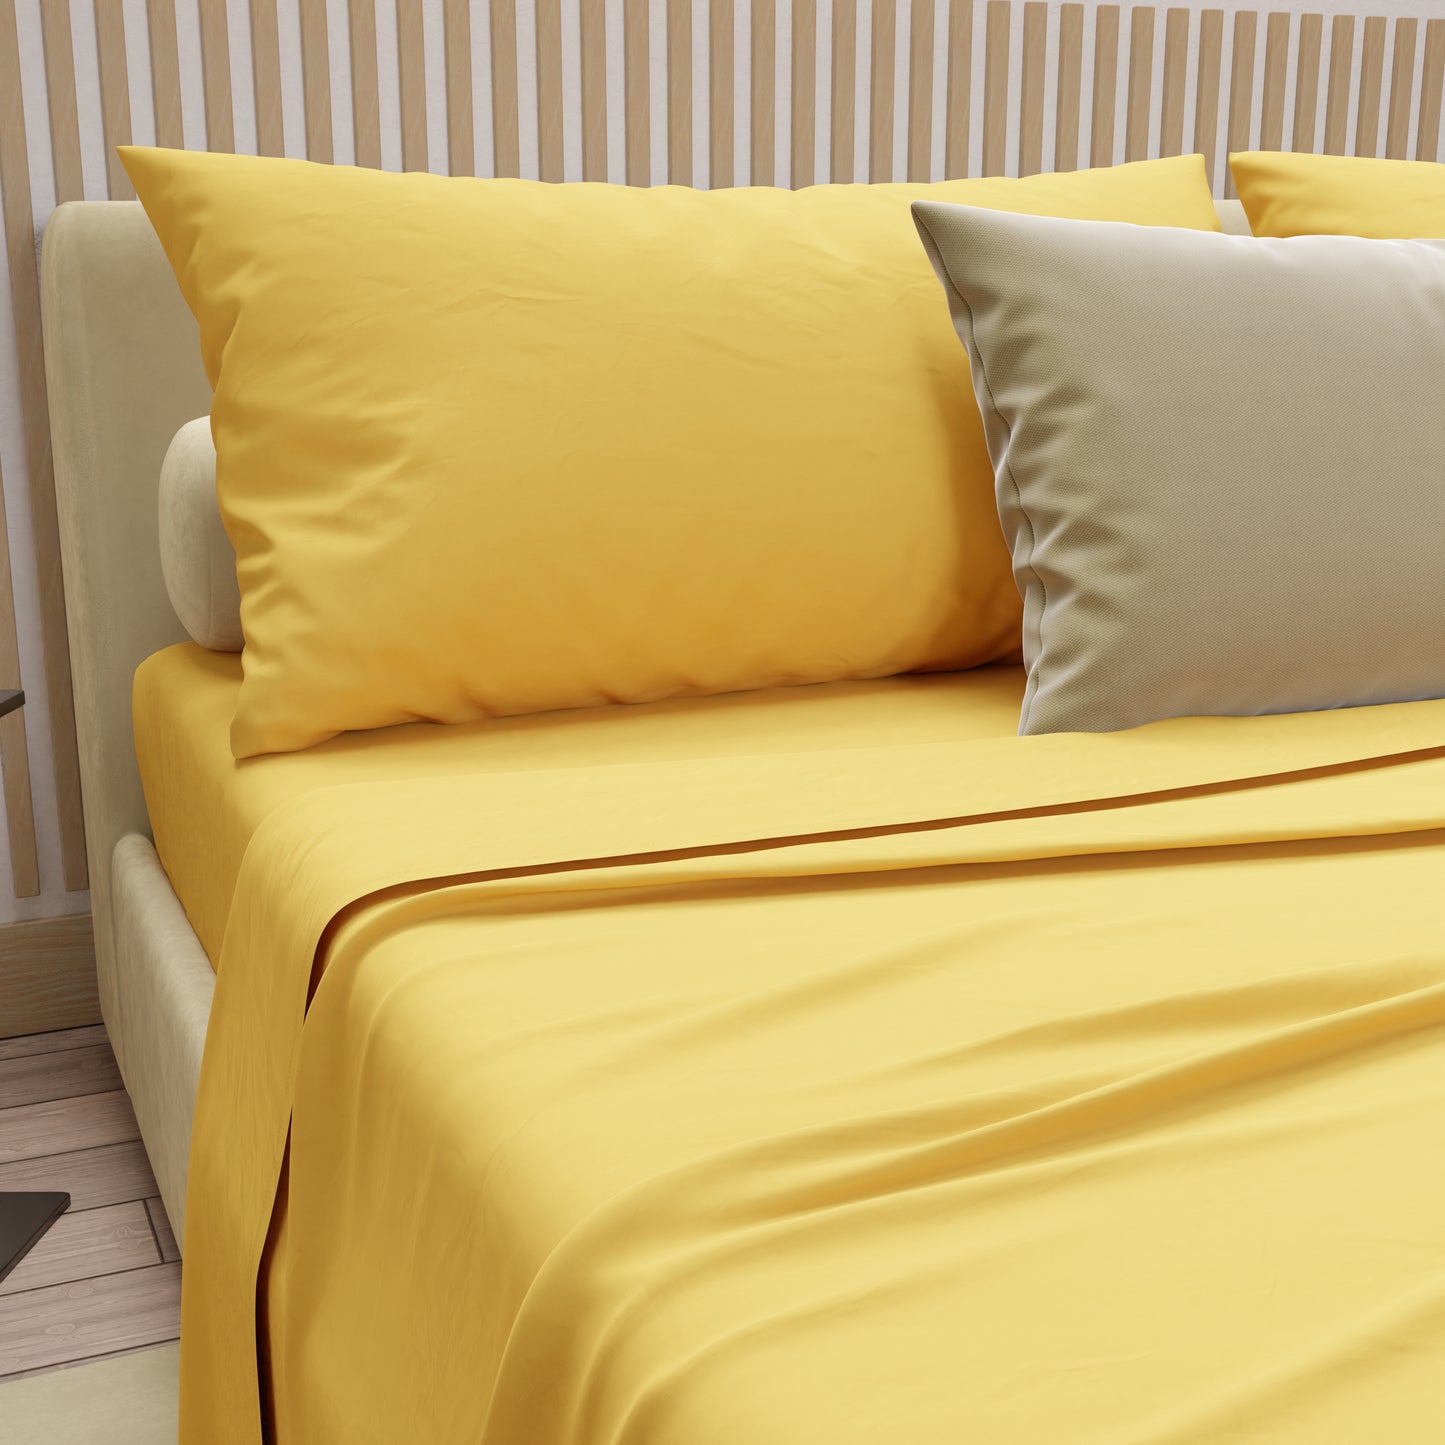 Double, Single, Single and Half Sheets, 100% Cotton, Yellow